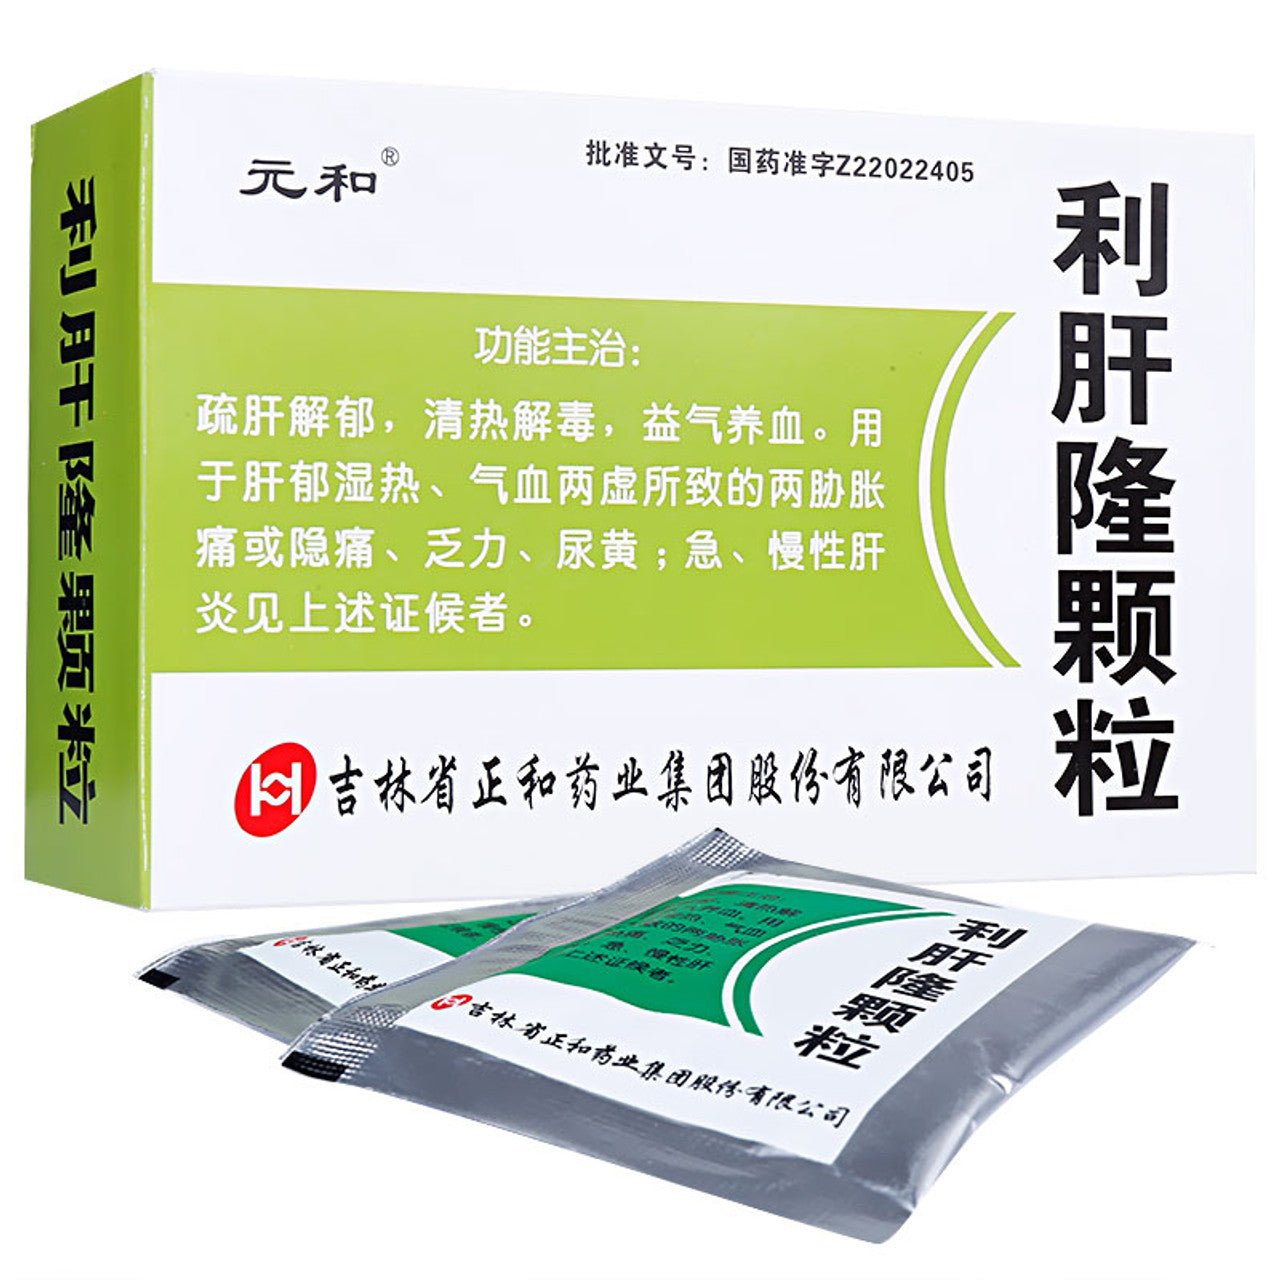 Chinese Herb. Brand Yuan He.  Liganlong Keli or Liganlong Granules or Li Gan Long Ke Li or Li Gan Long Granules for liver stagnation, damp-heat and deficiency of both qi and blood, acute and chronic hepatitis